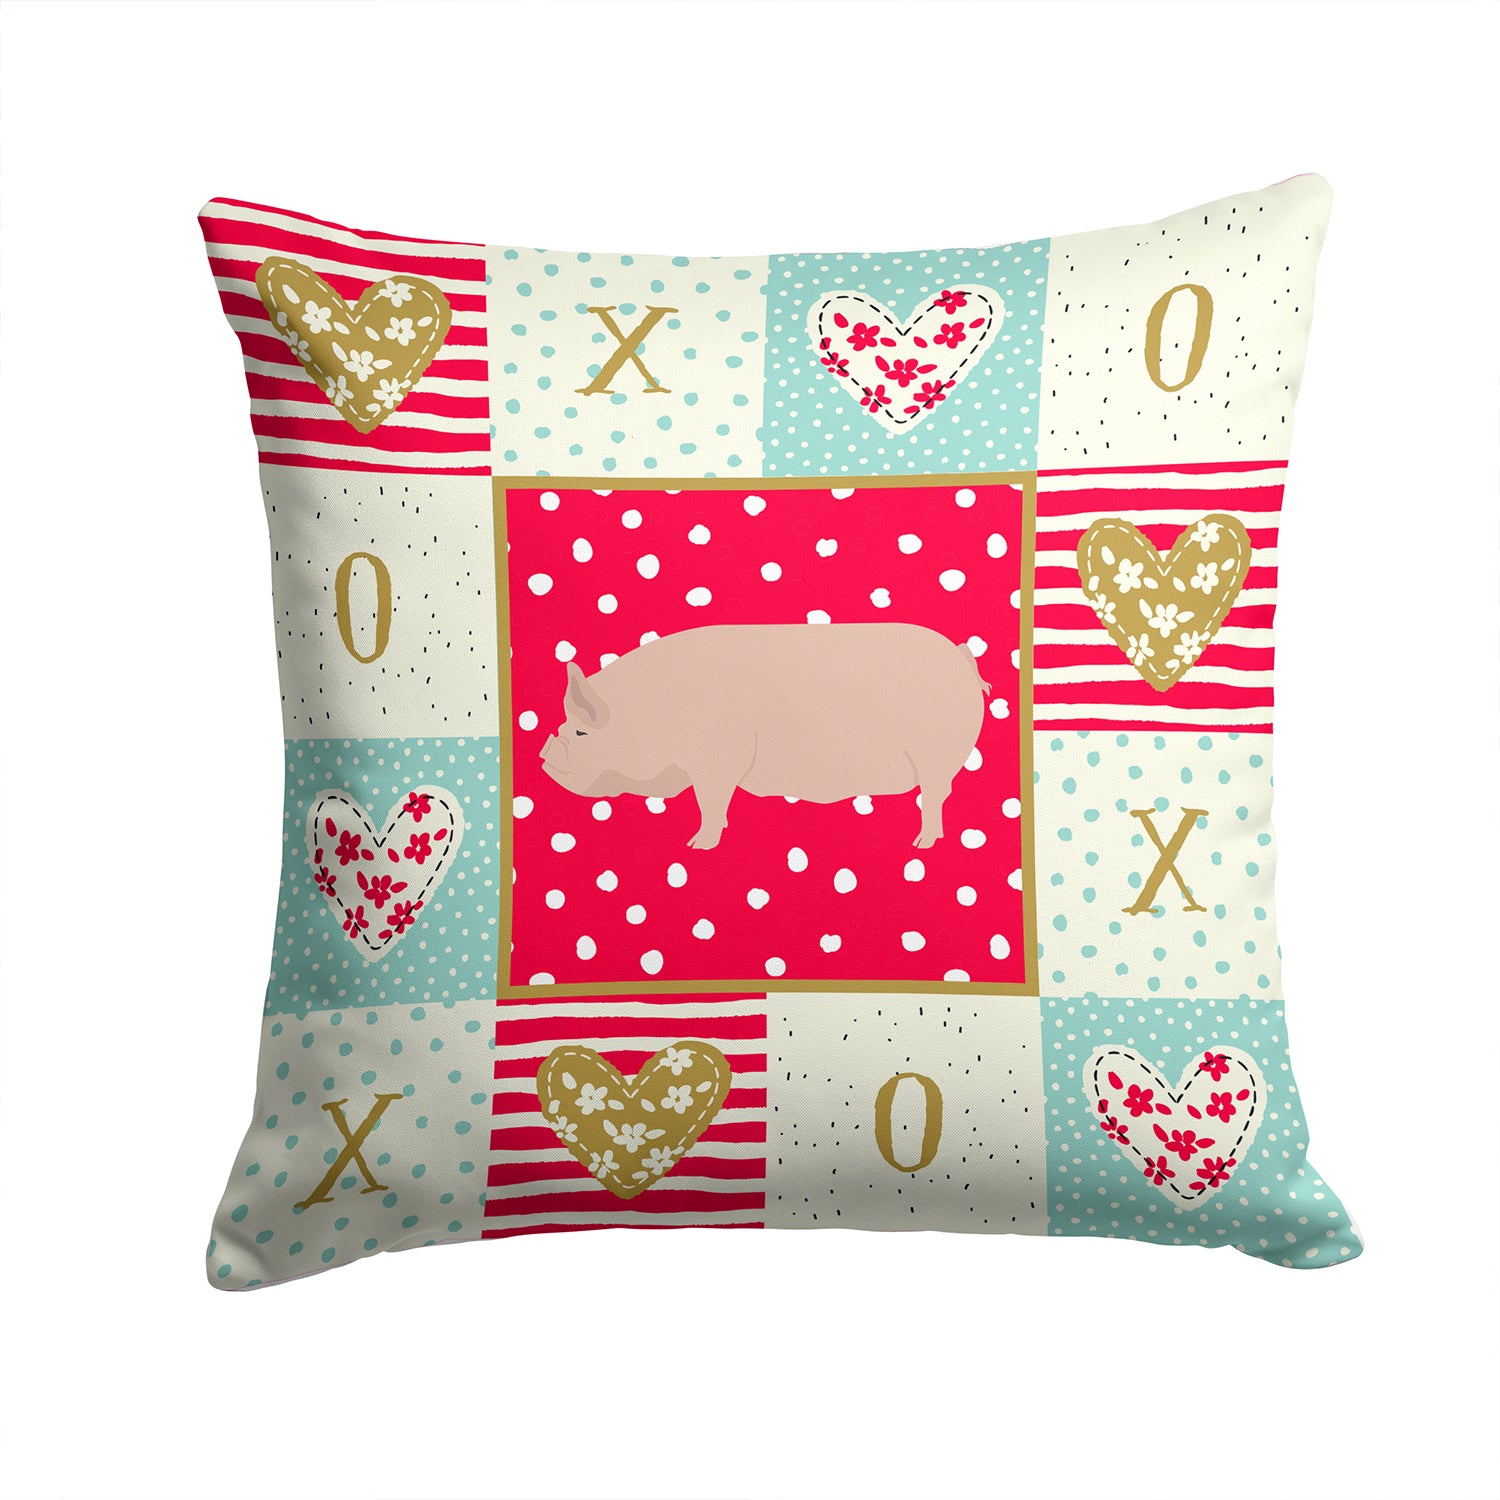 Welsh Pig Love Fabric Decorative Pillow CK5364PW1414 - the-store.com